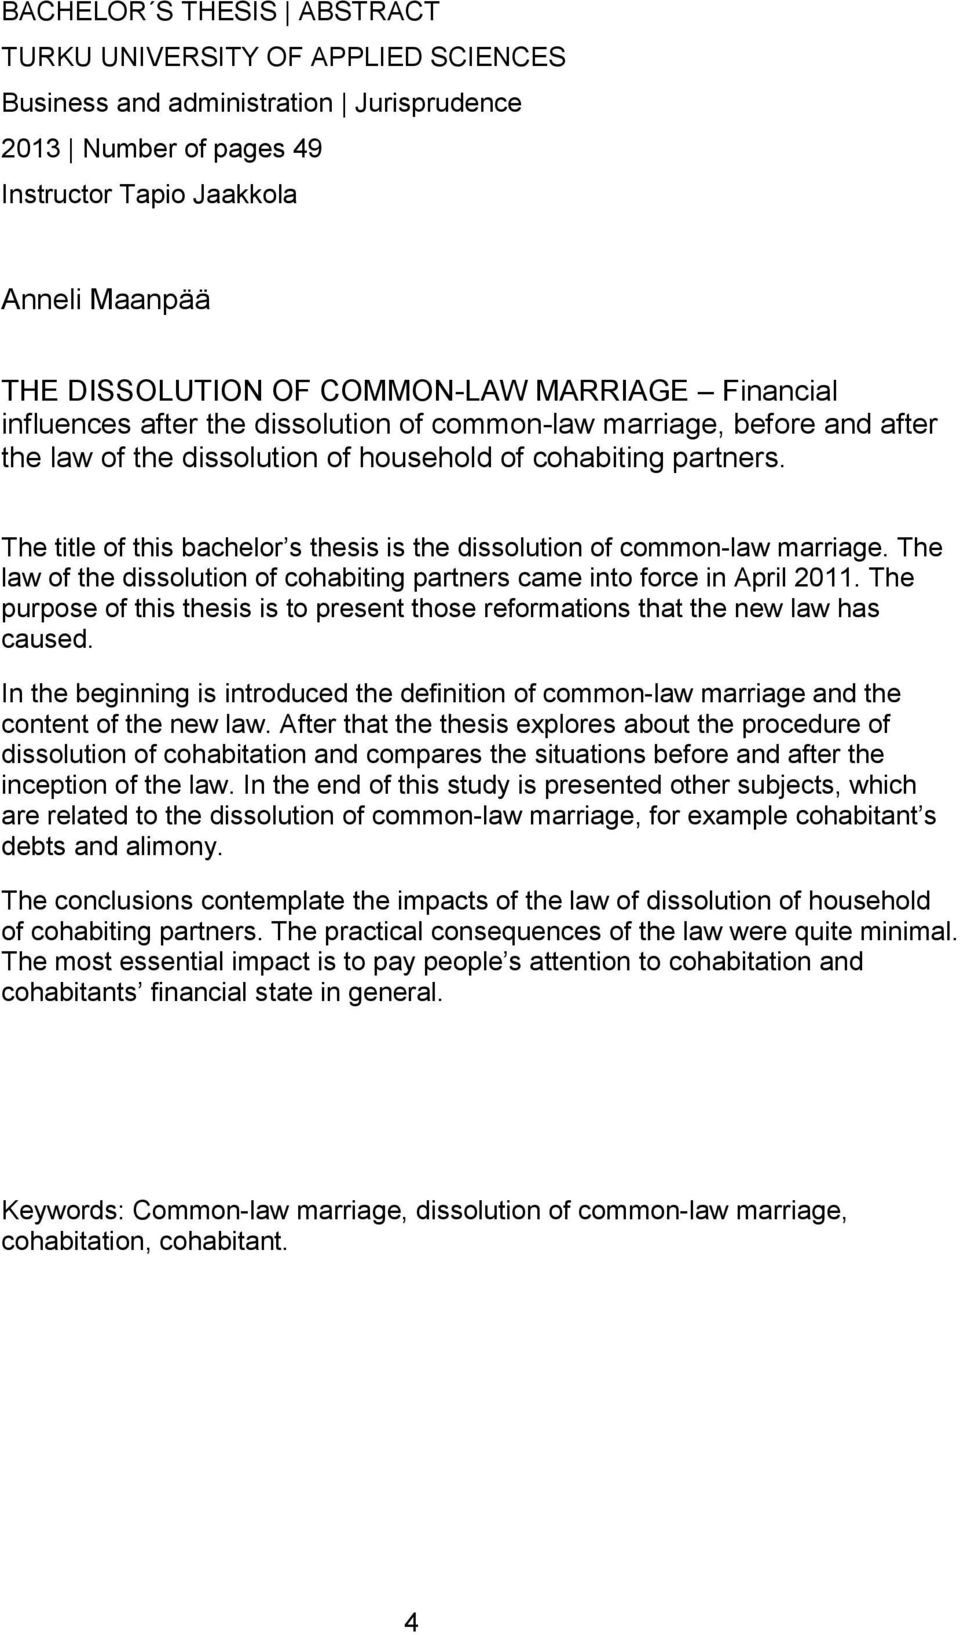 The title of this bachelor s thesis is the dissolution of common-law marriage. The law of the dissolution of cohabiting partners came into force in April 2011.